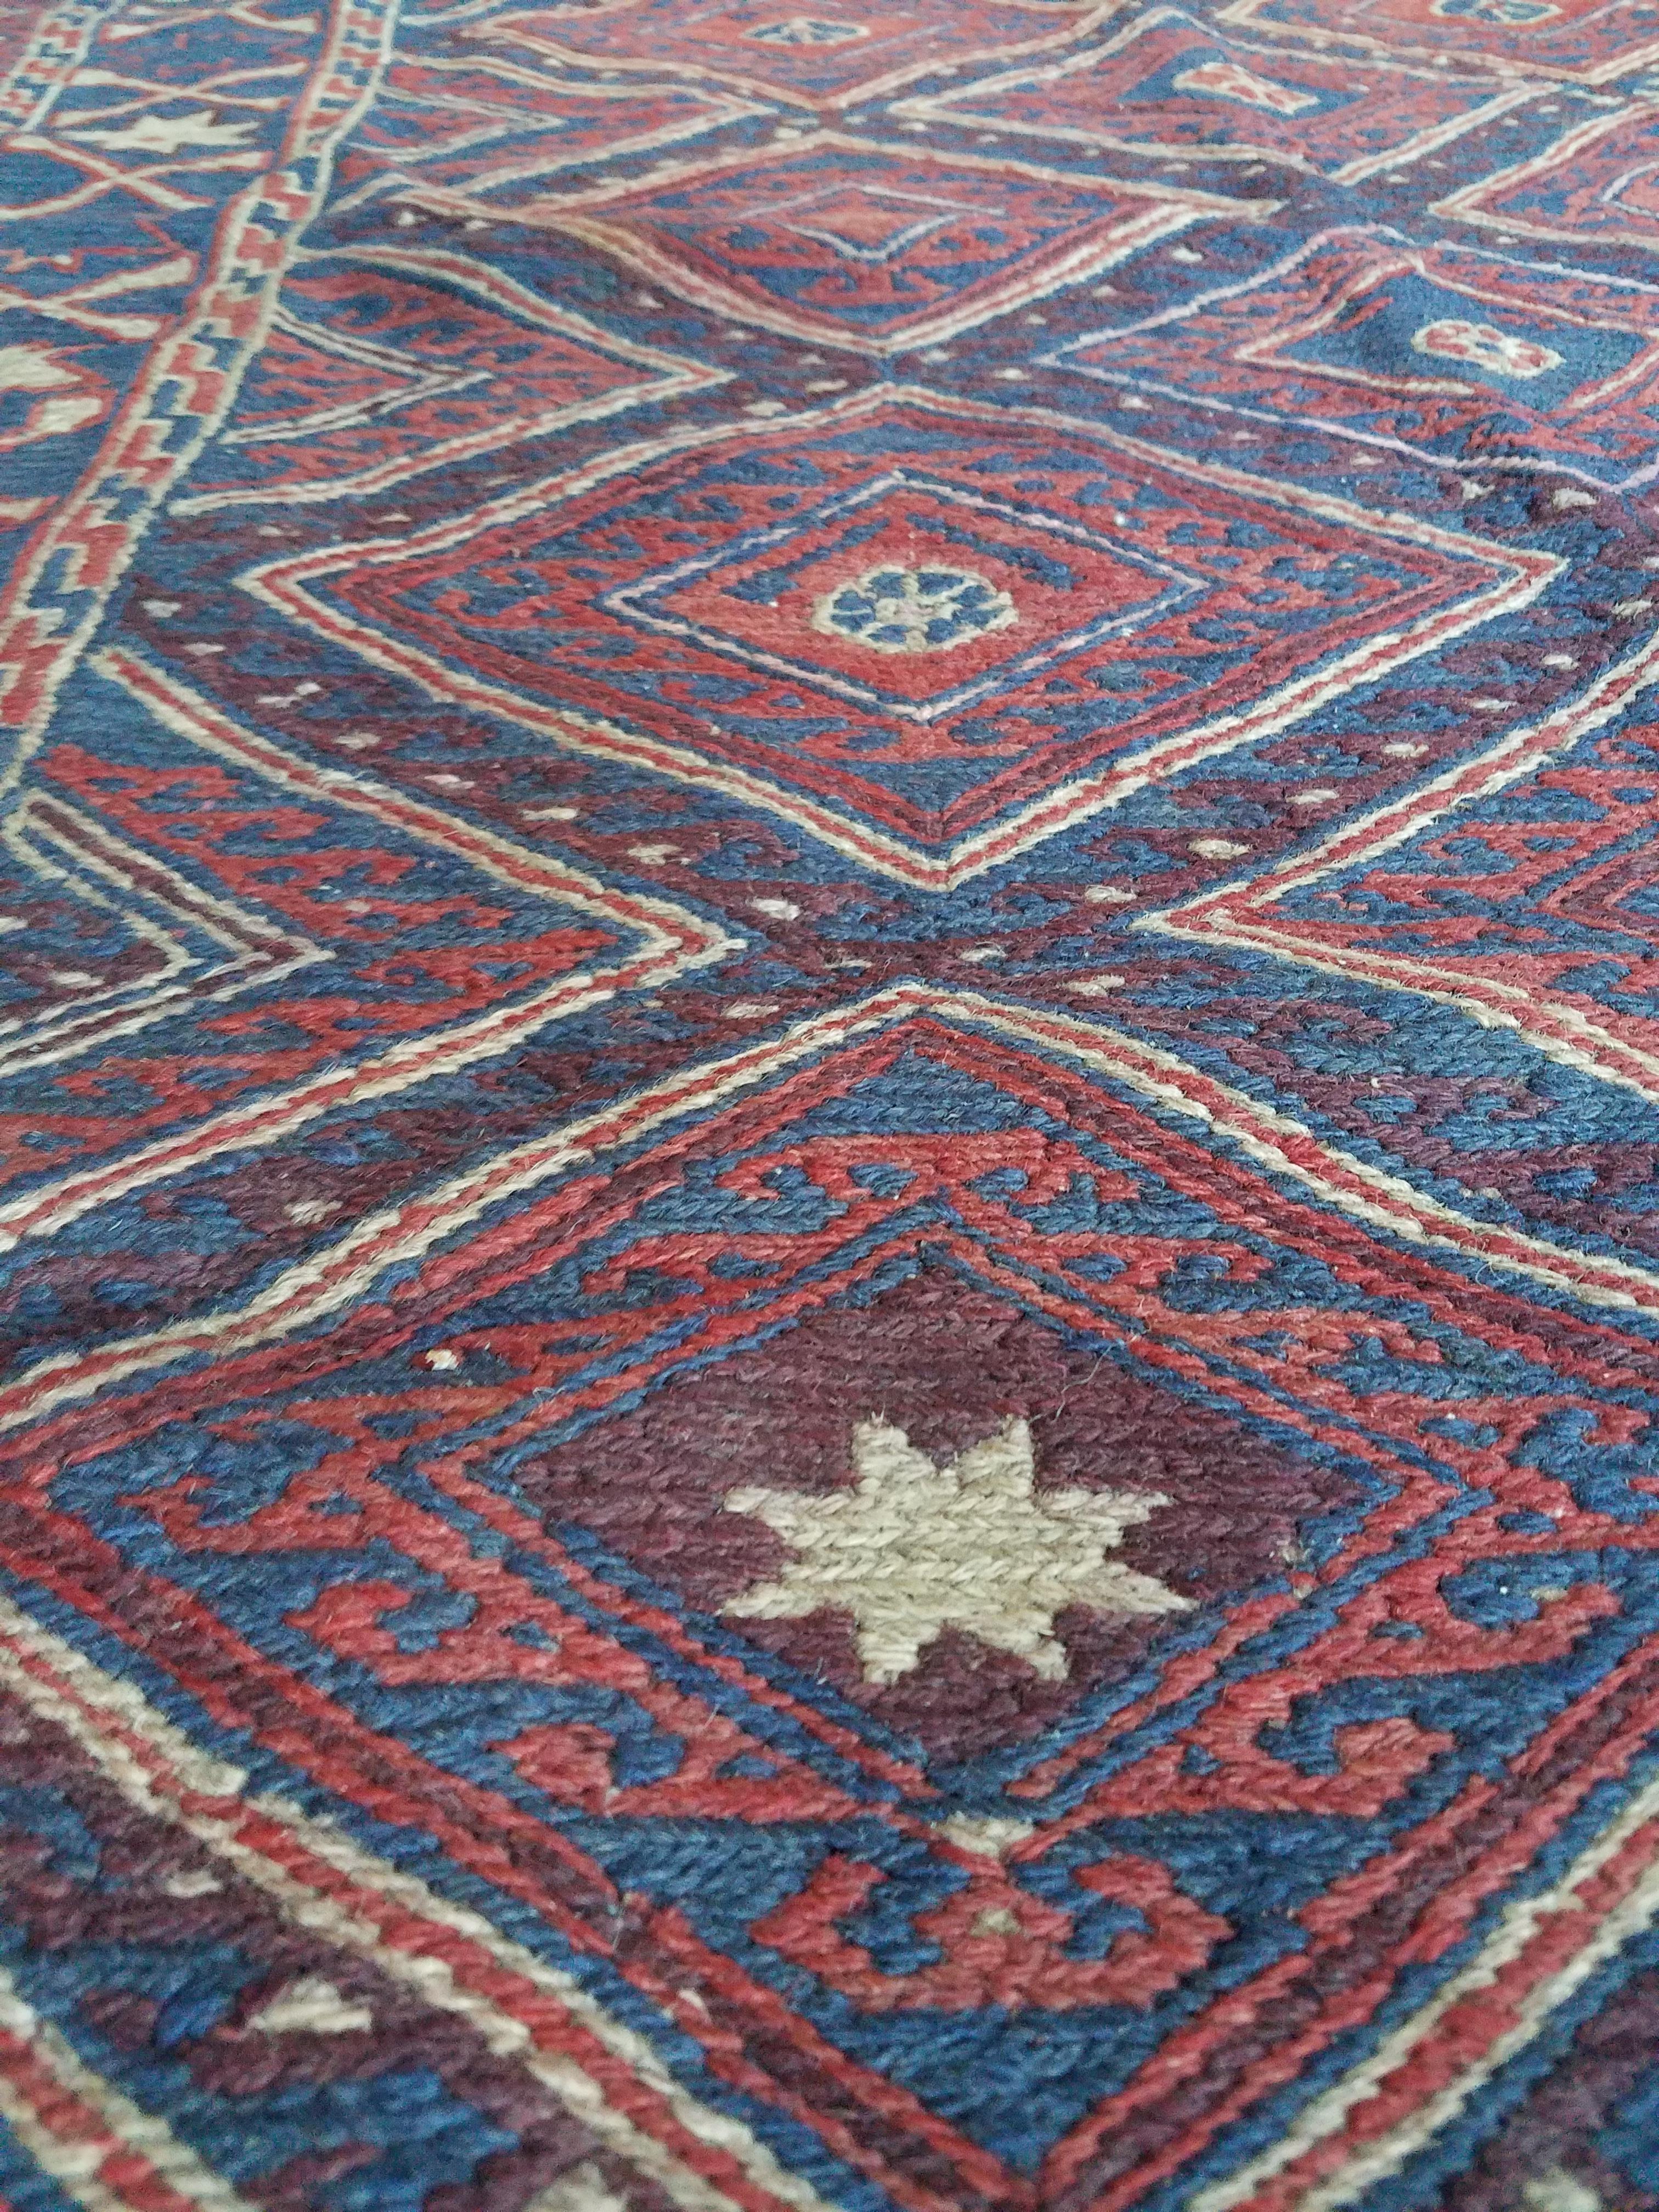 Hand-Woven Another Beautiful Oriental Tribal Area Rug, Sar 7 For Sale